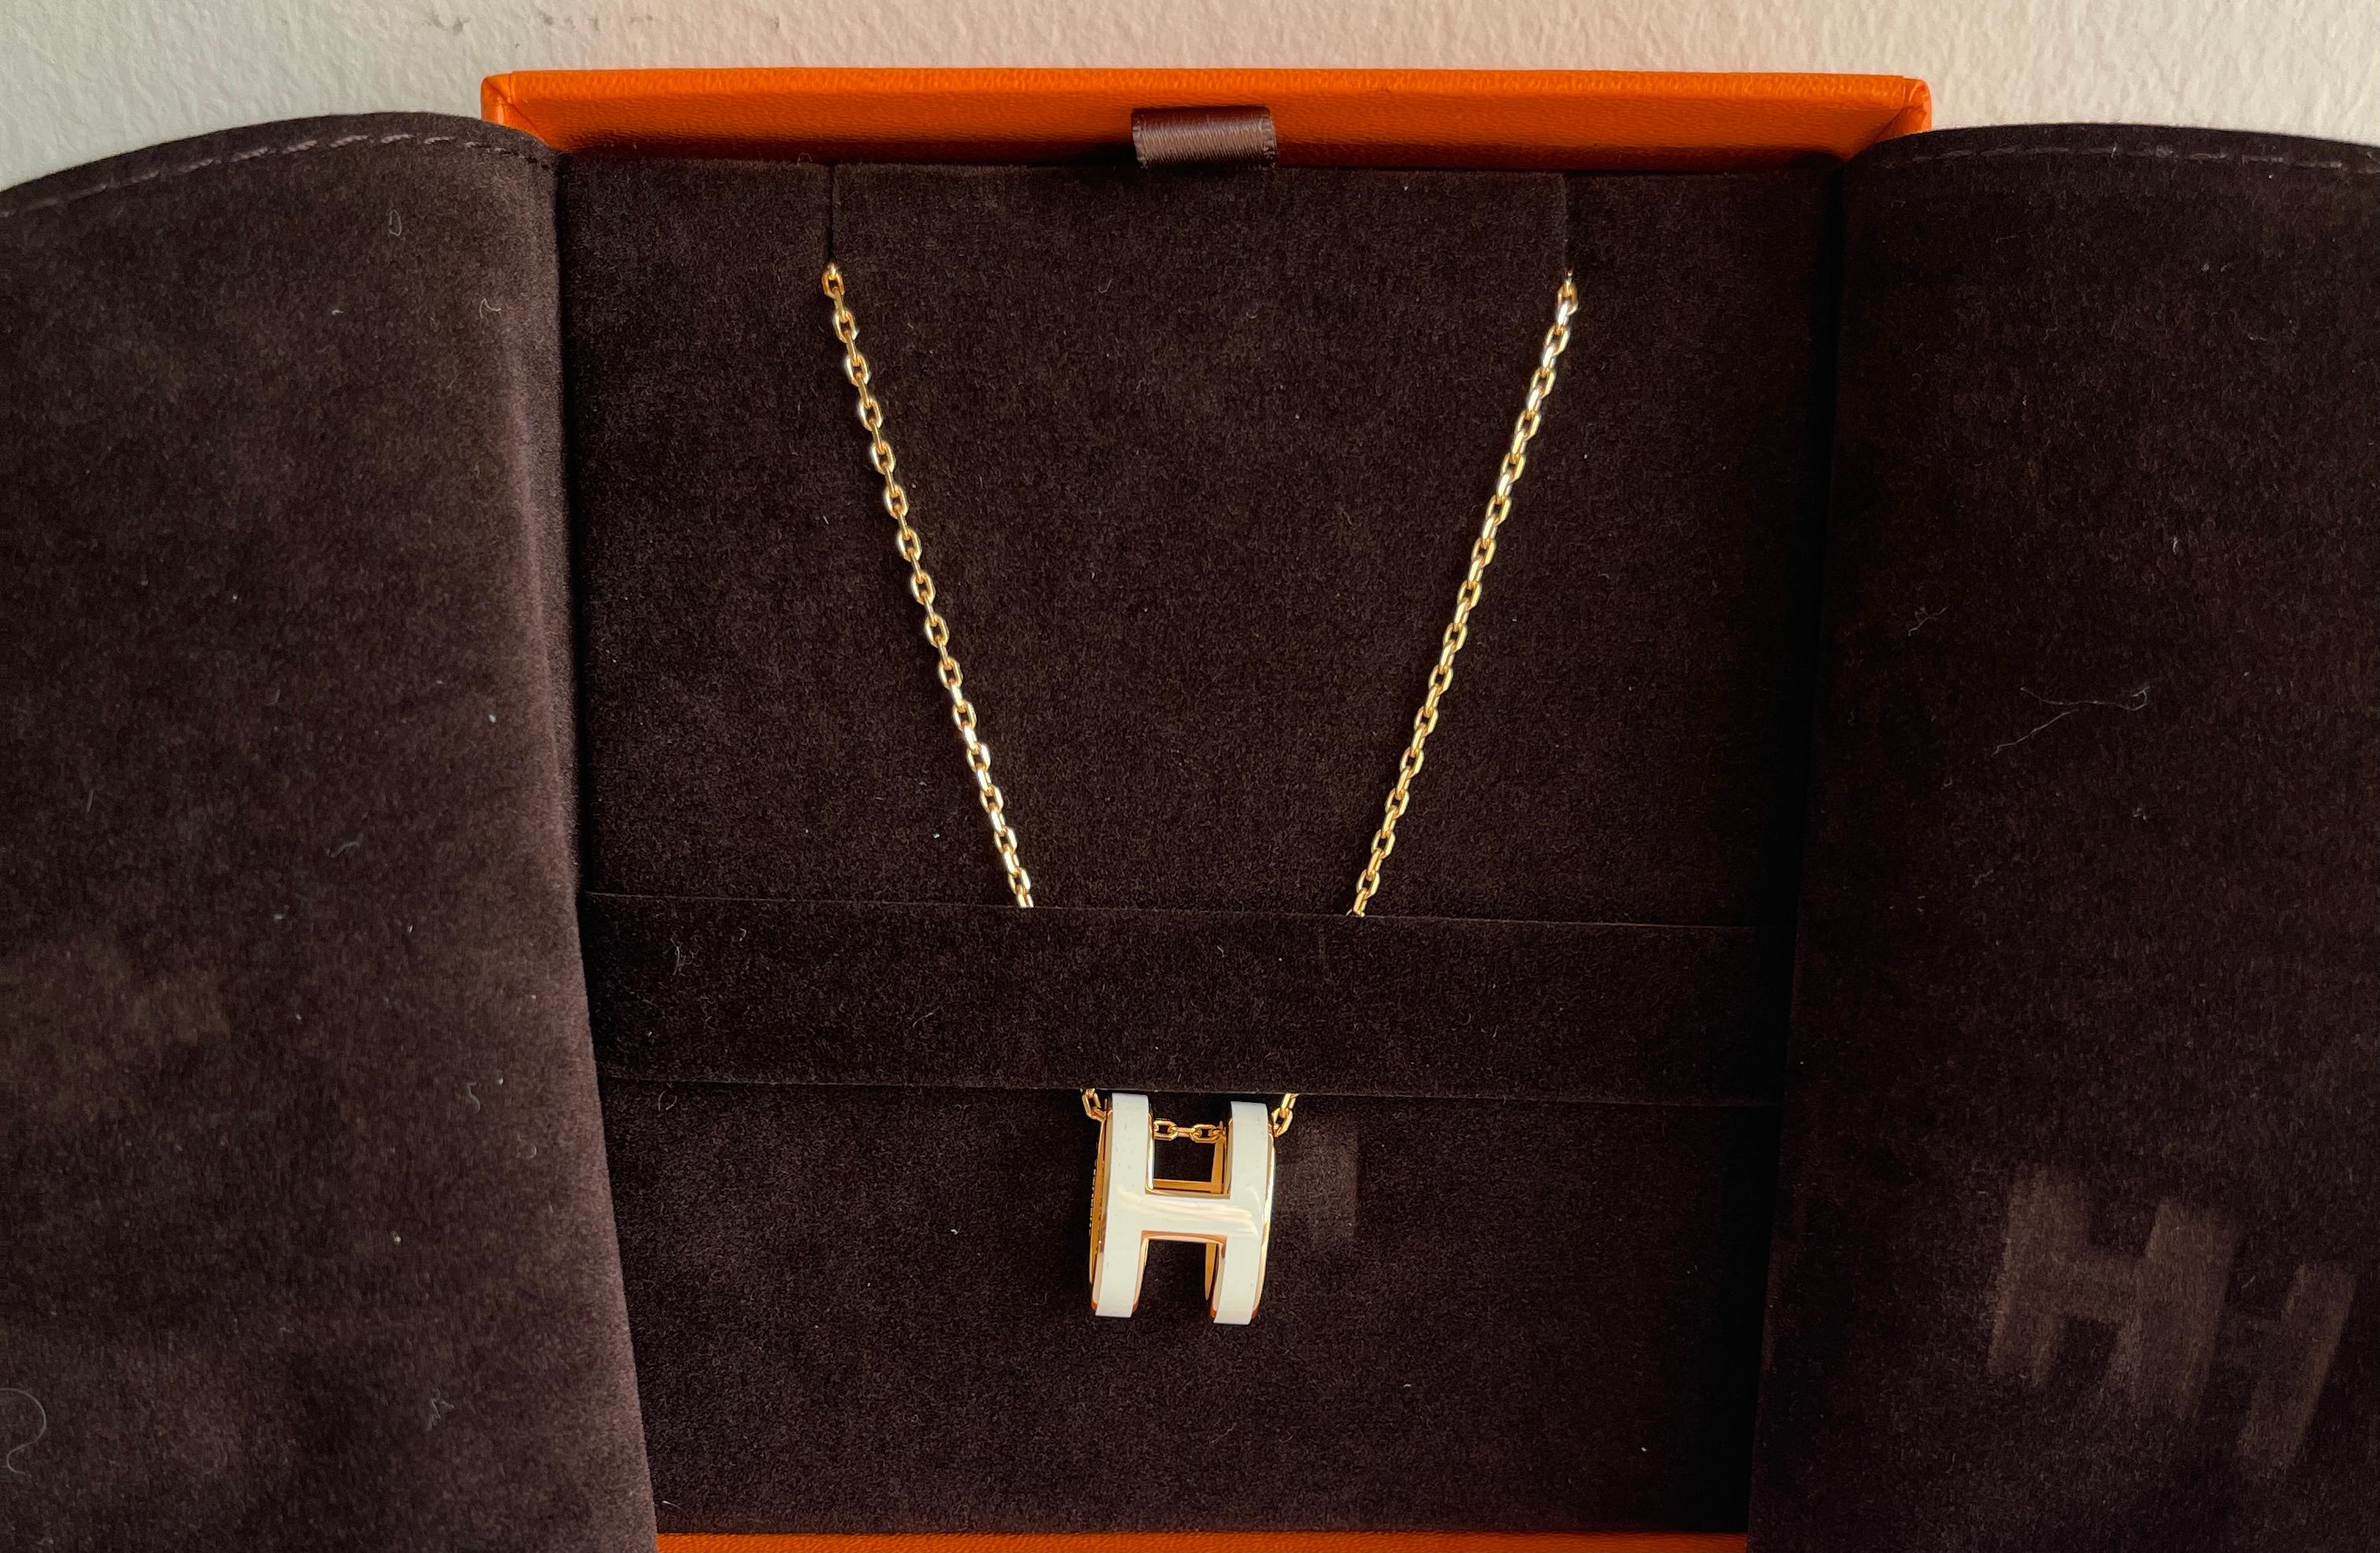 Pop H pendant
Hermes
The color is a White
Lacquered pendant with gold plated hardware
Pendant in metal with gold plated hardware.

Made in France
0.63